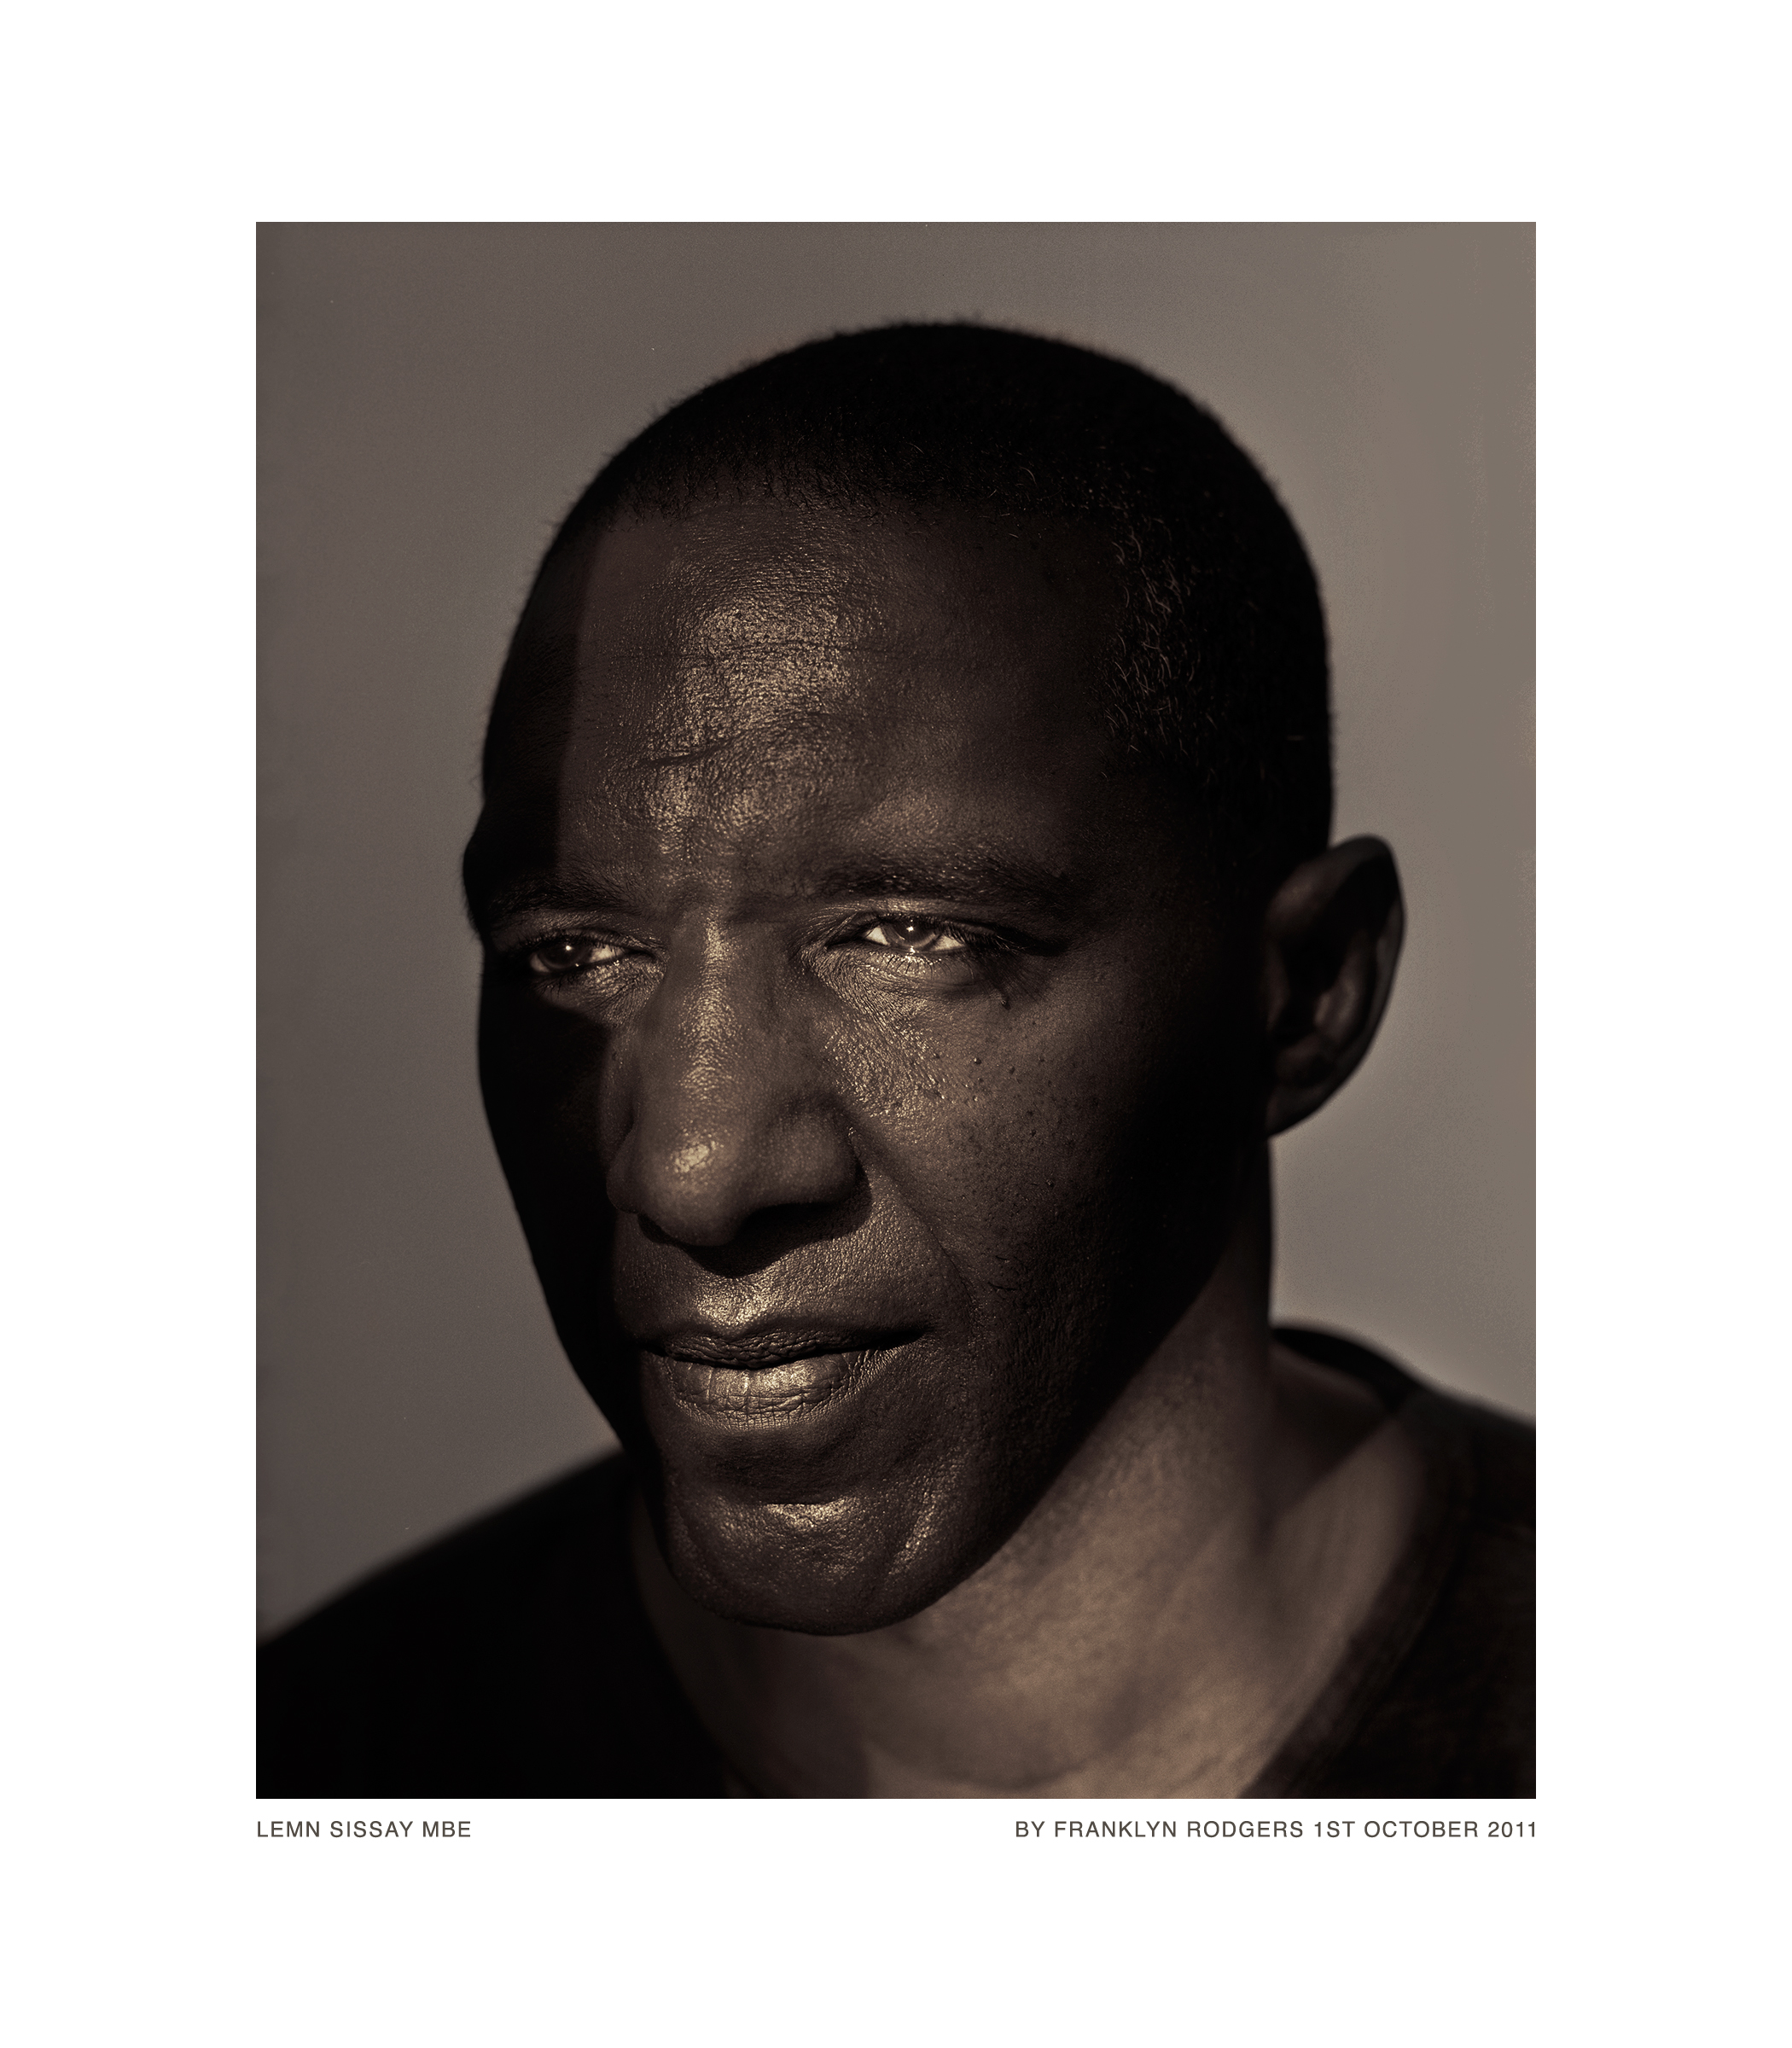 This photo can not be reproduced without permission from Franklyn Rodgerson - Lemn-Sissay-test-